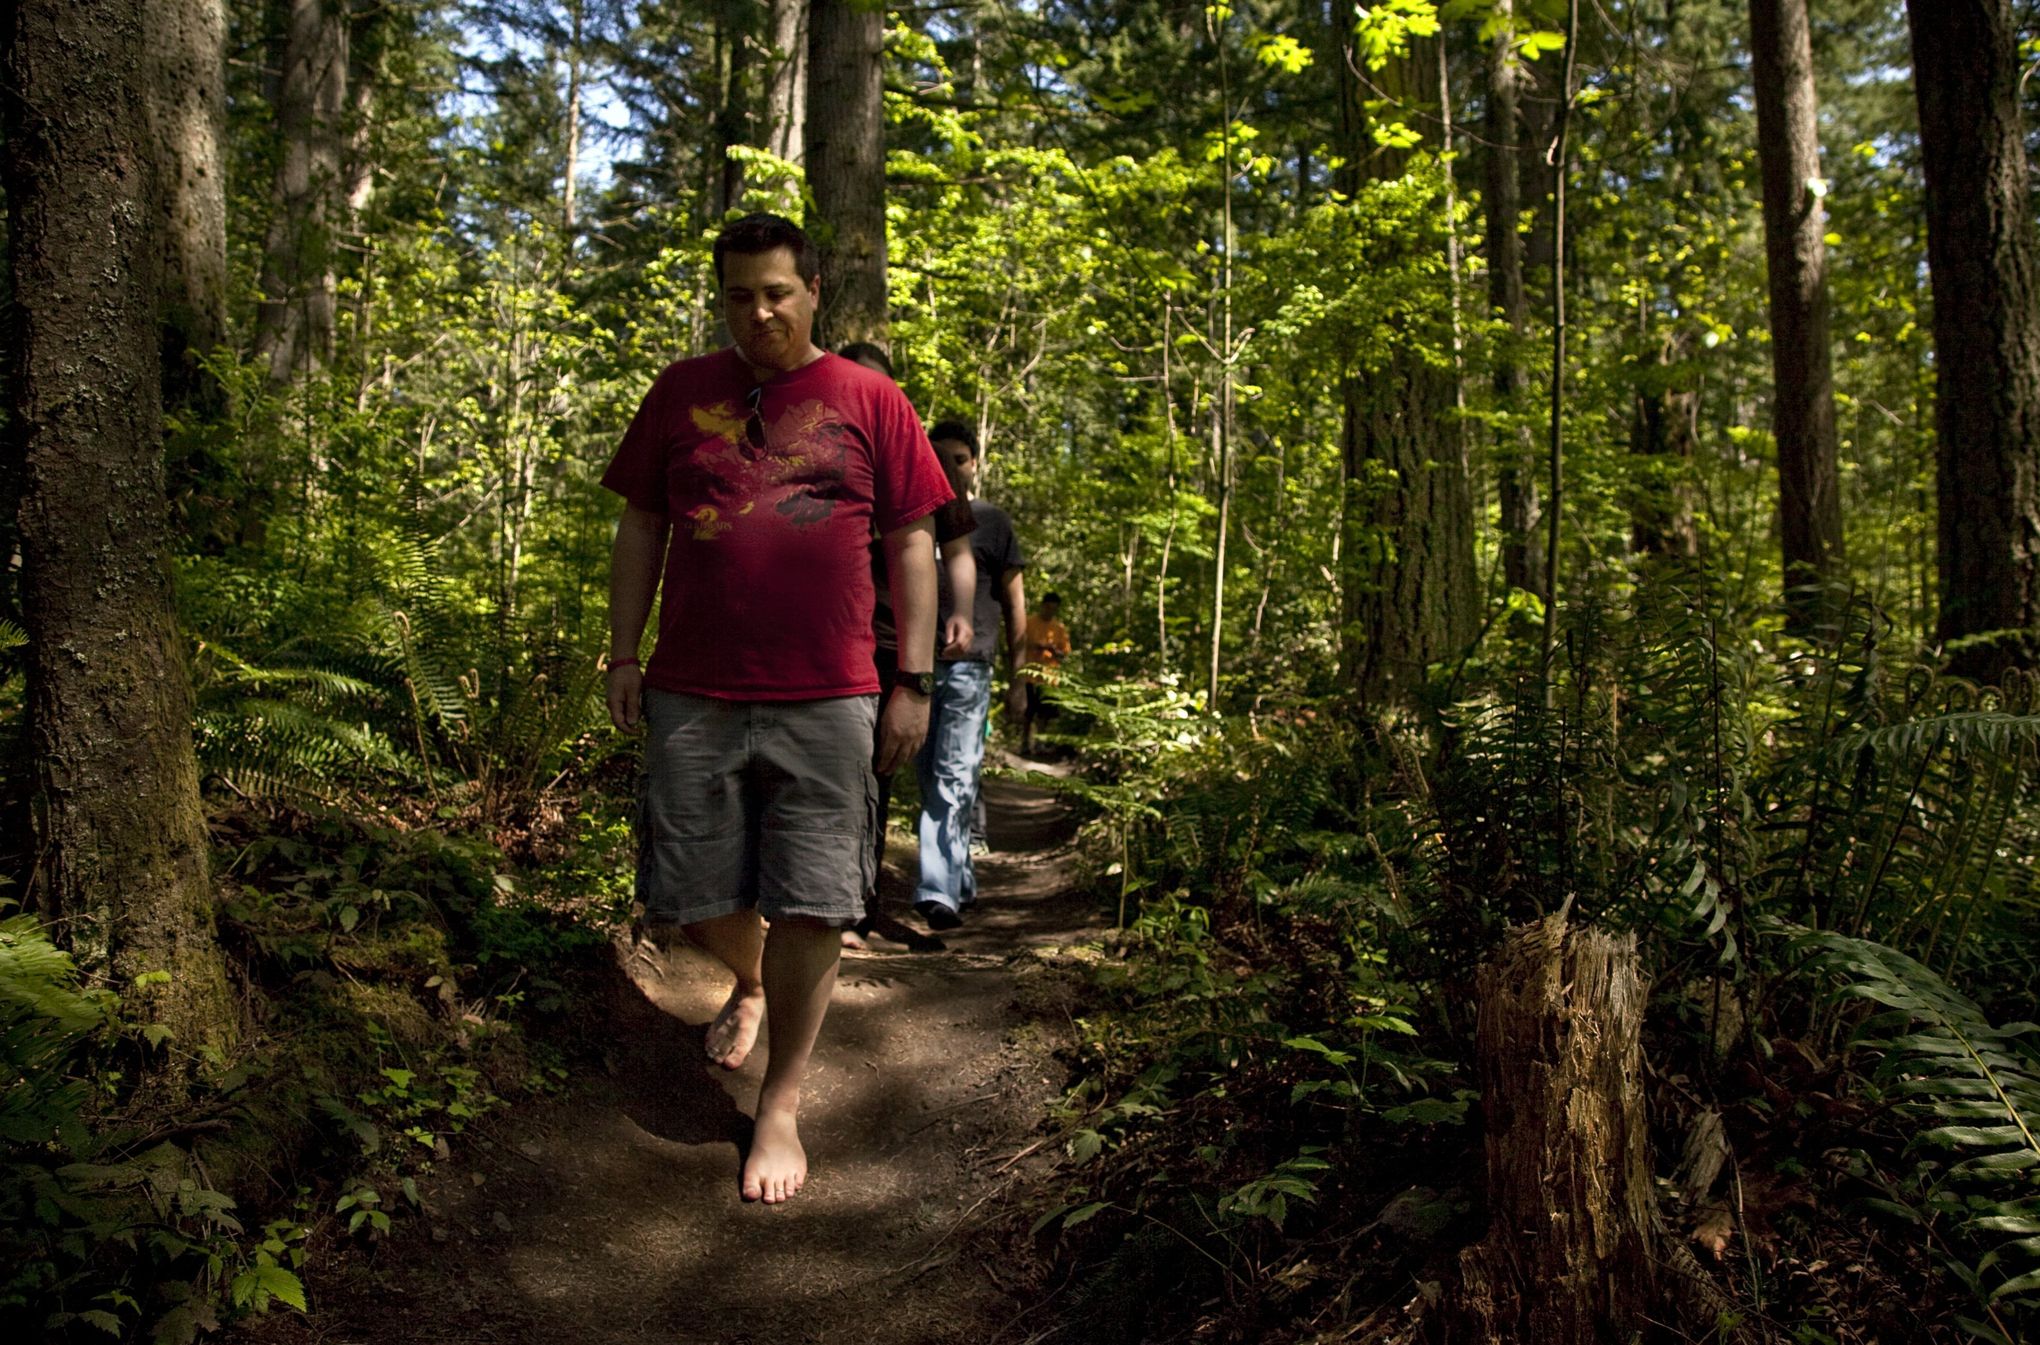 Barefoot hikers get a toehold on the outdoors